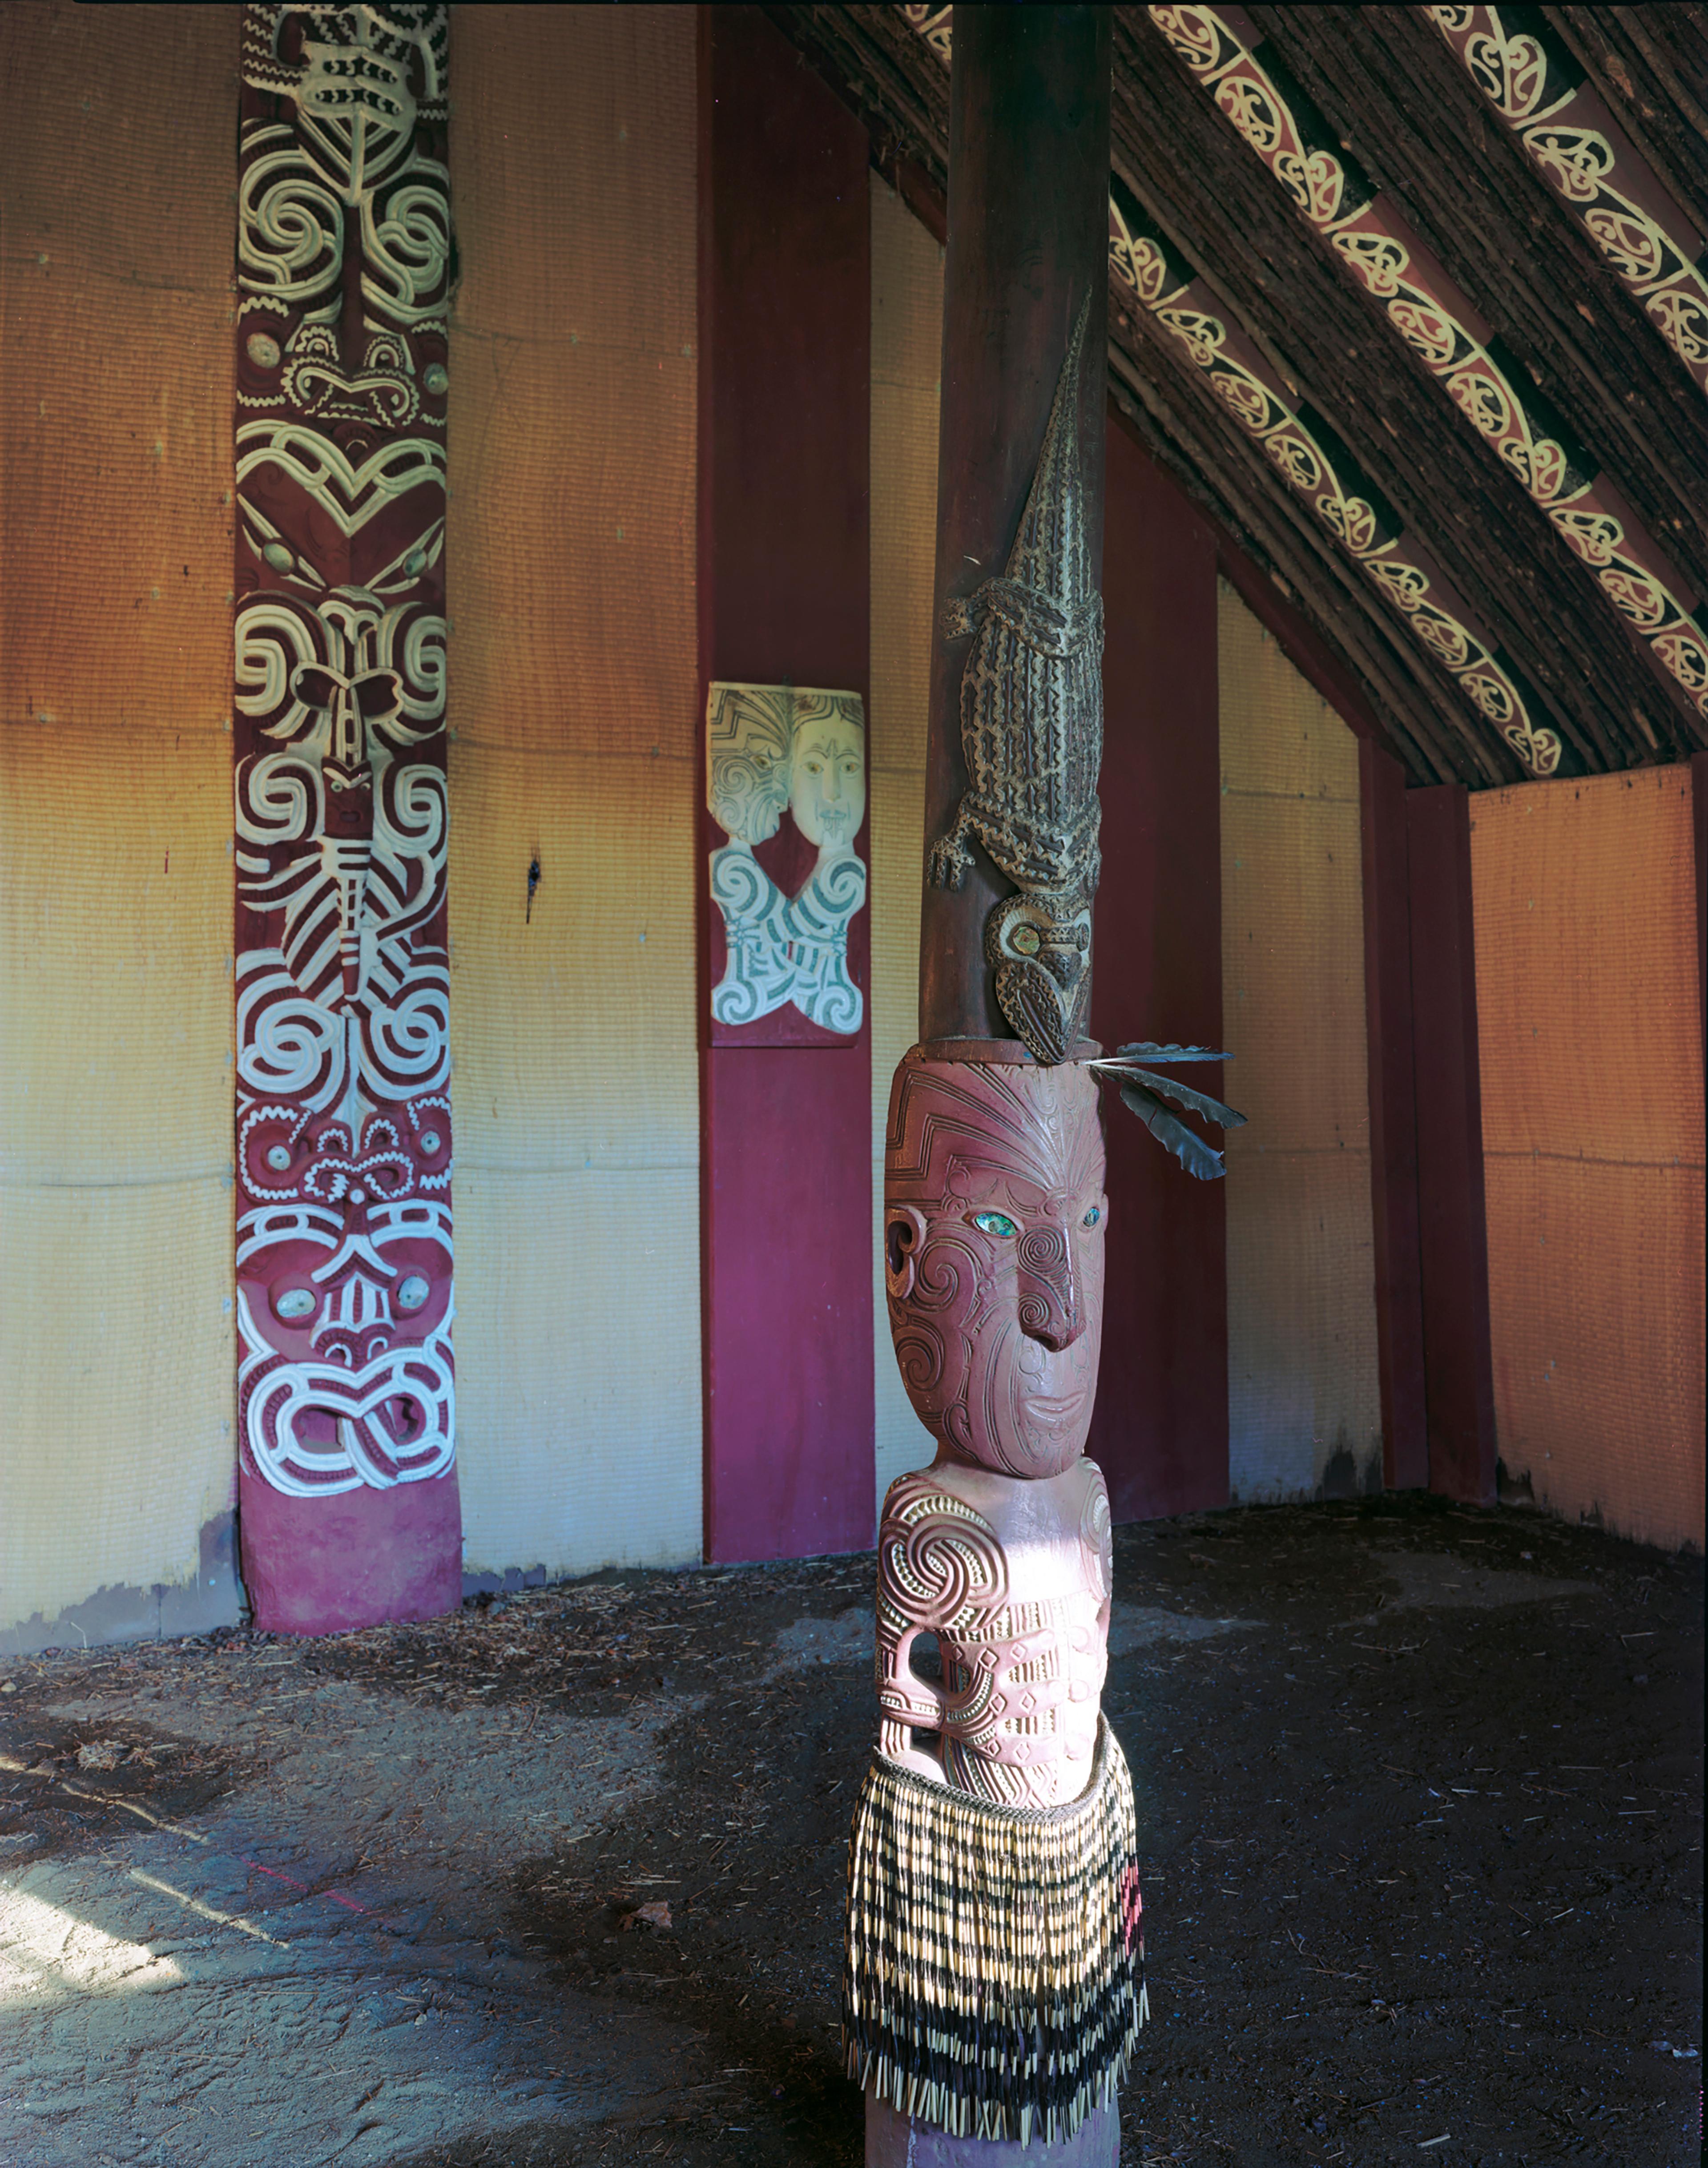 Image of carved pou at entrance to Hinemihi with carved and painted panels in back ground